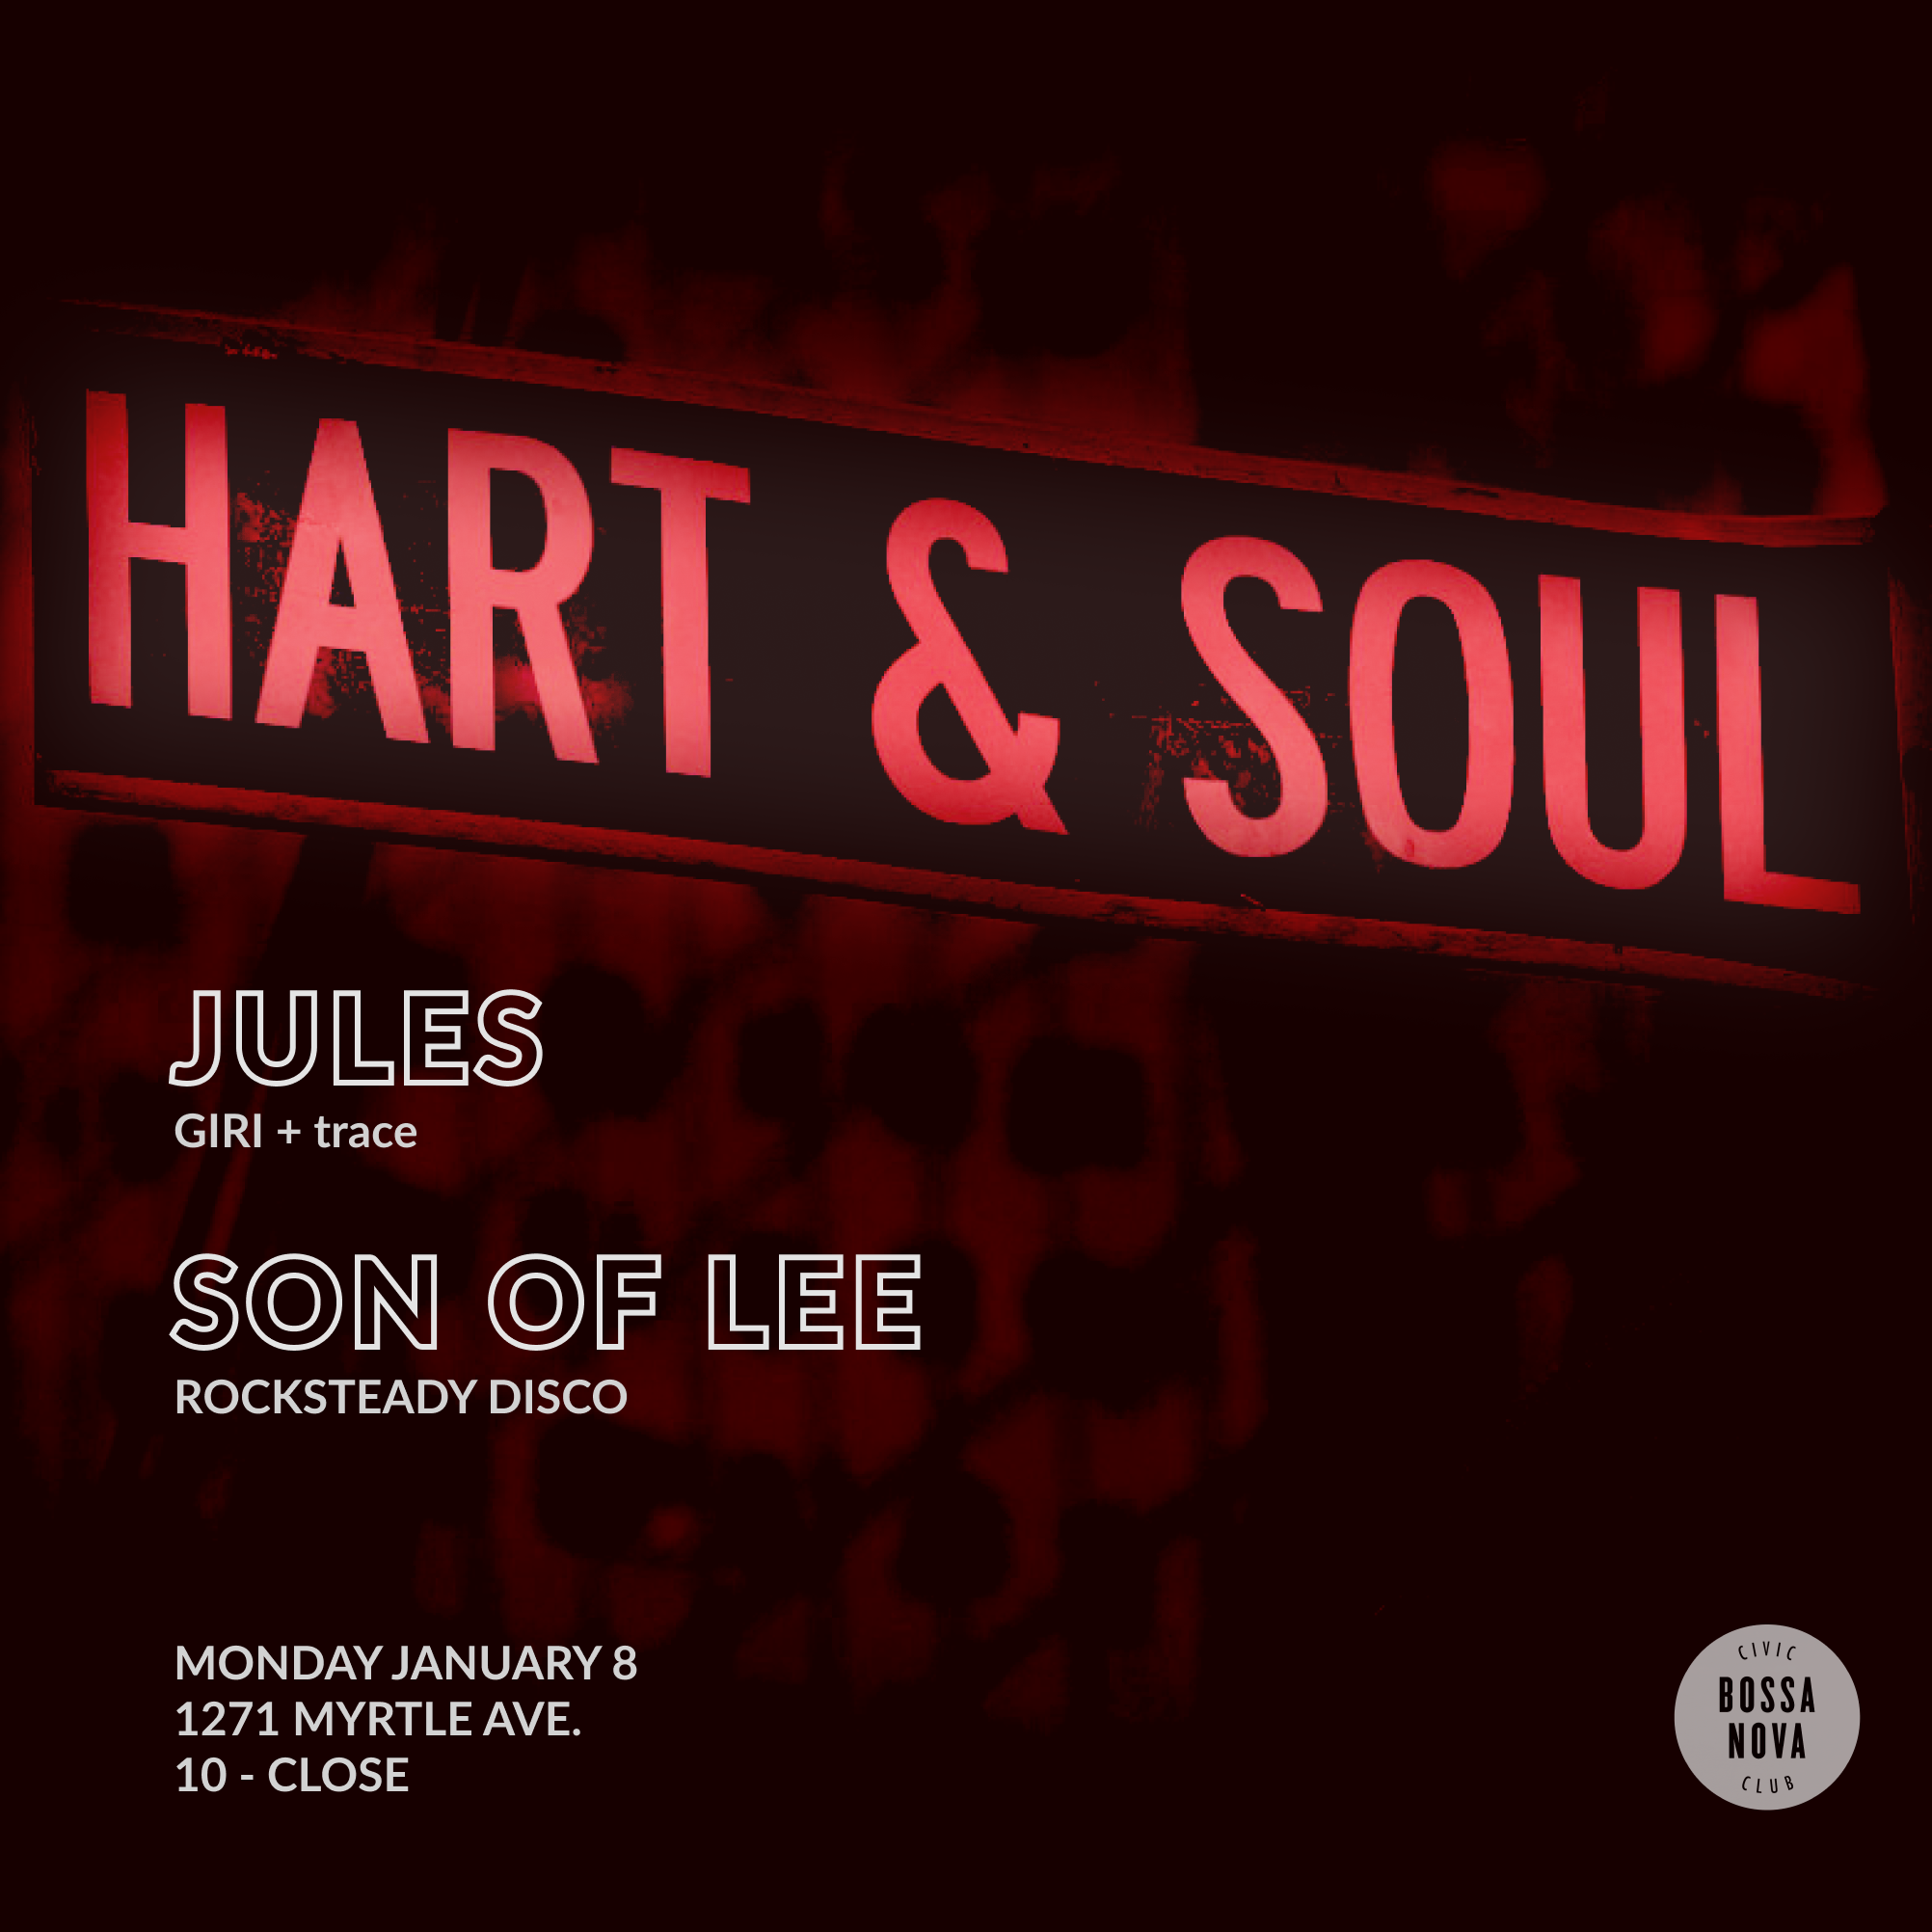 Hart & Soul: Jules x Son Of Lee - フライヤー表